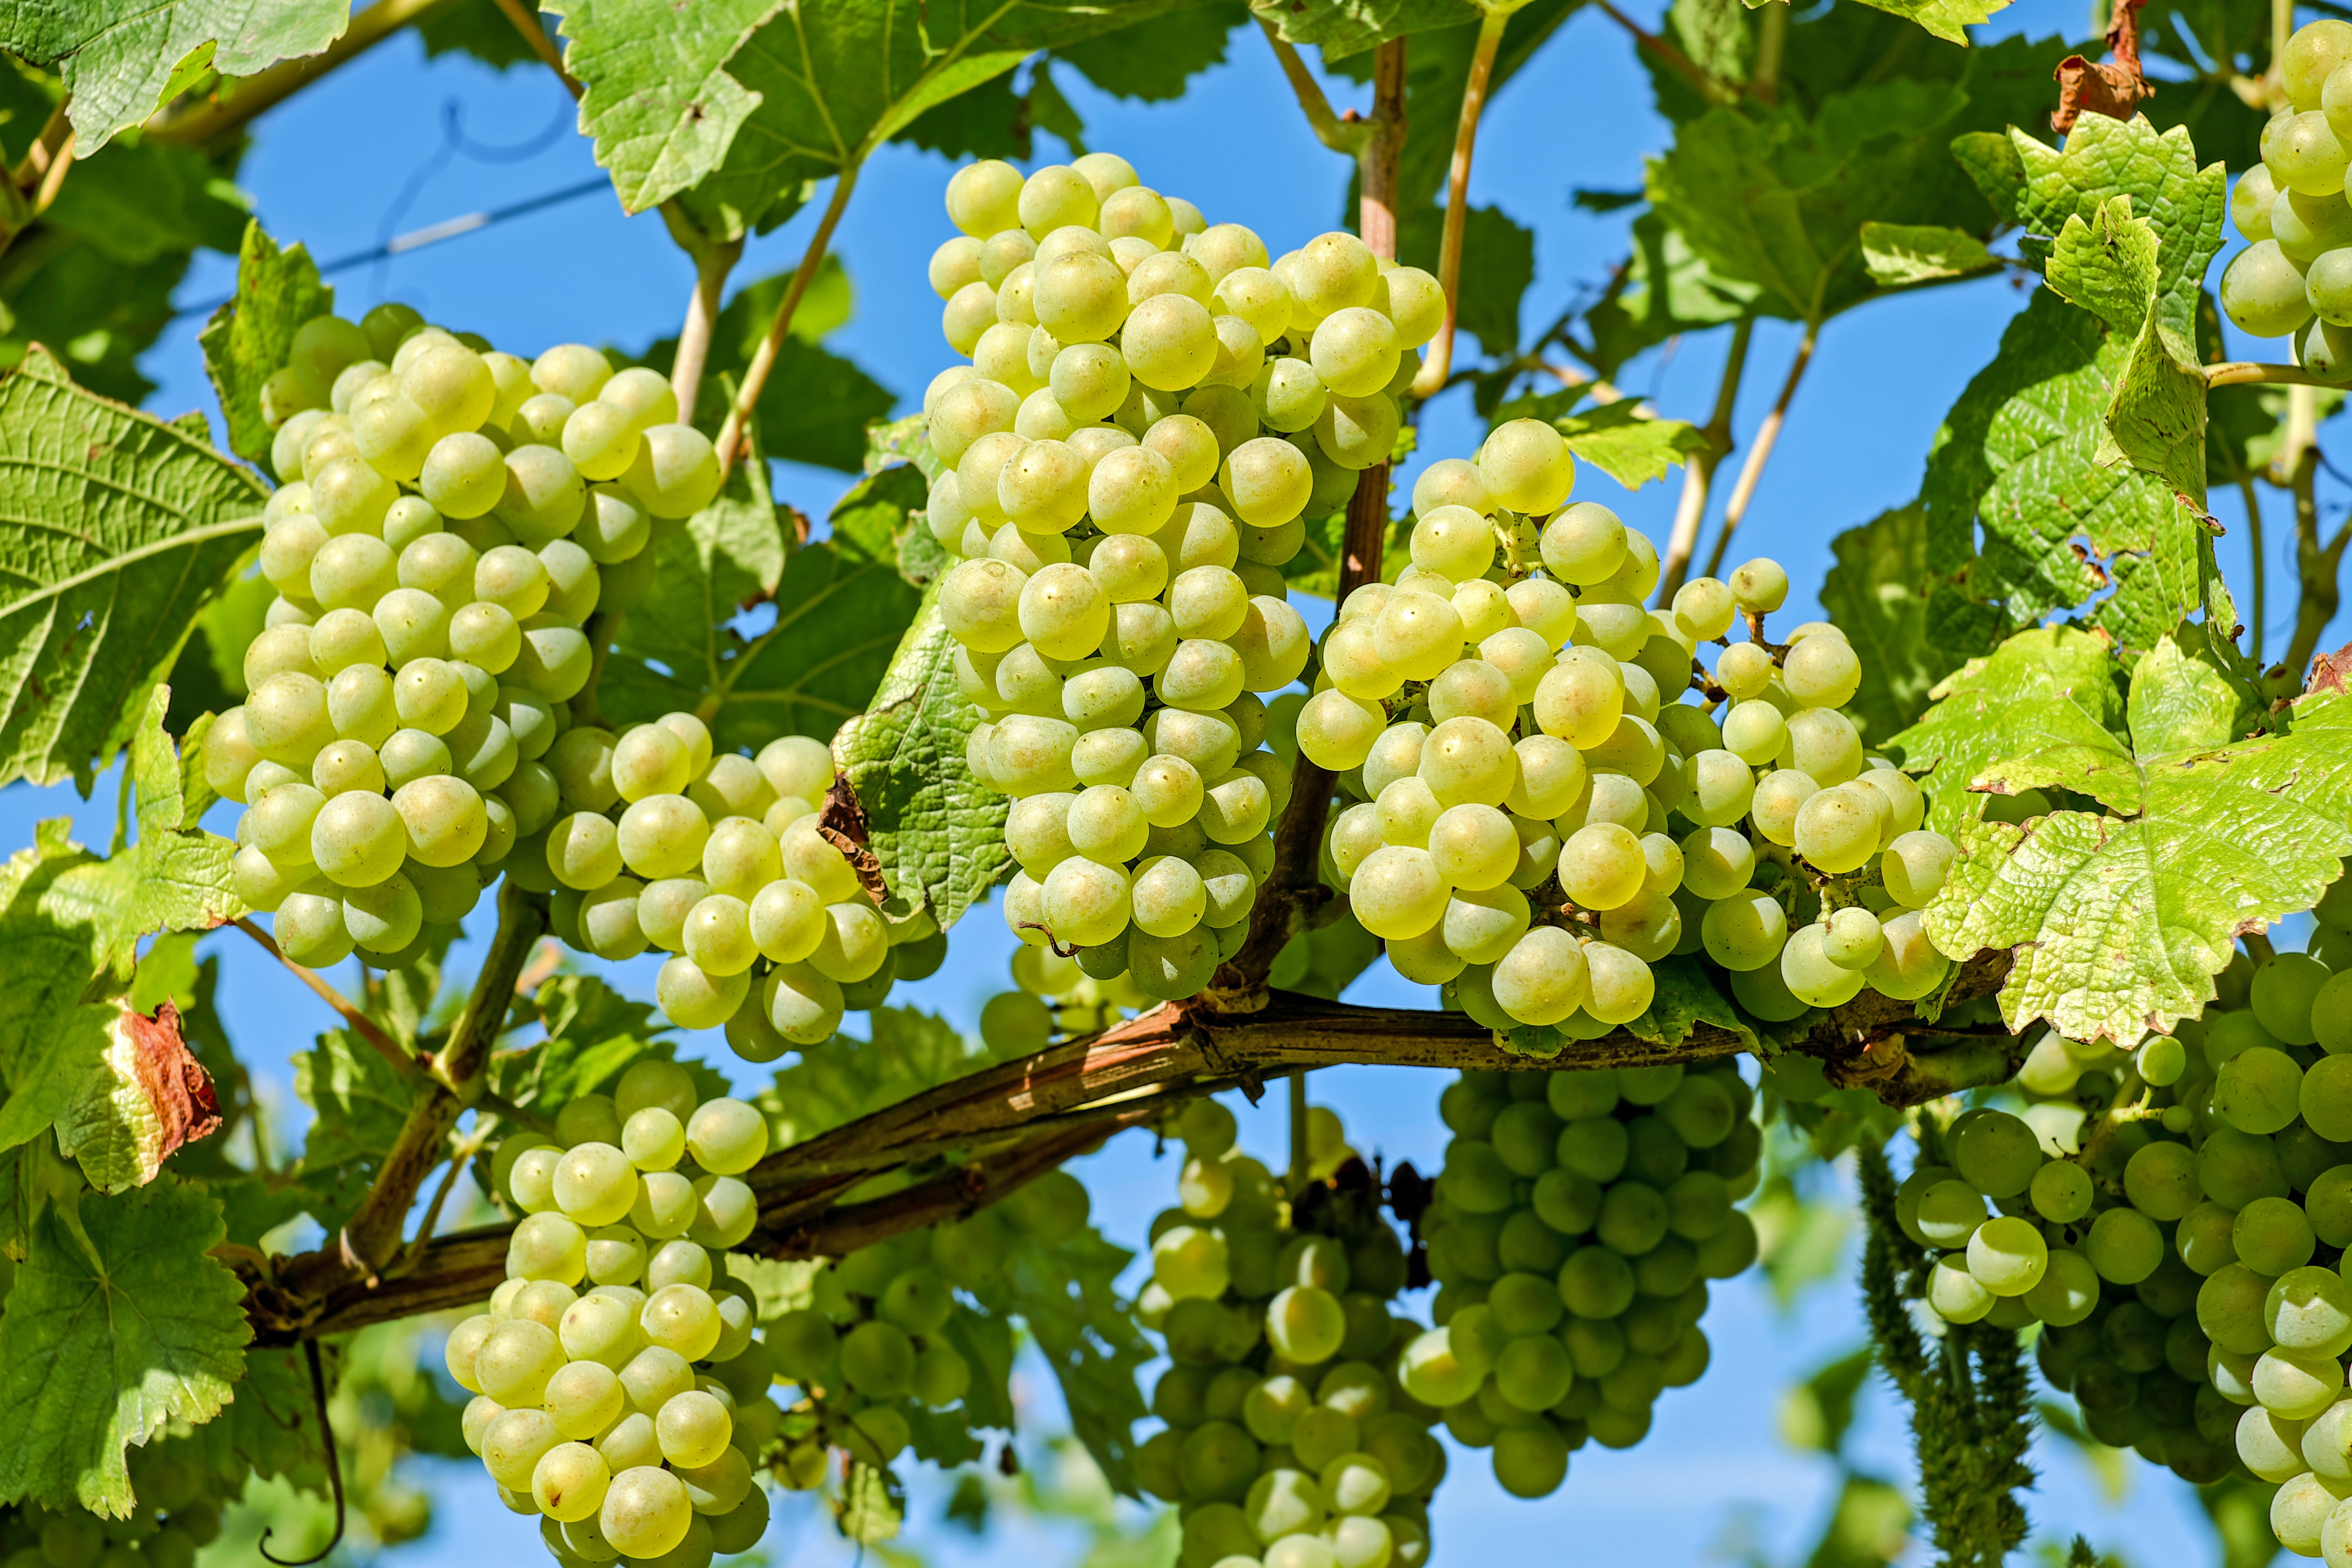 Green Grapes on a Grapevine for Wine by Couleur